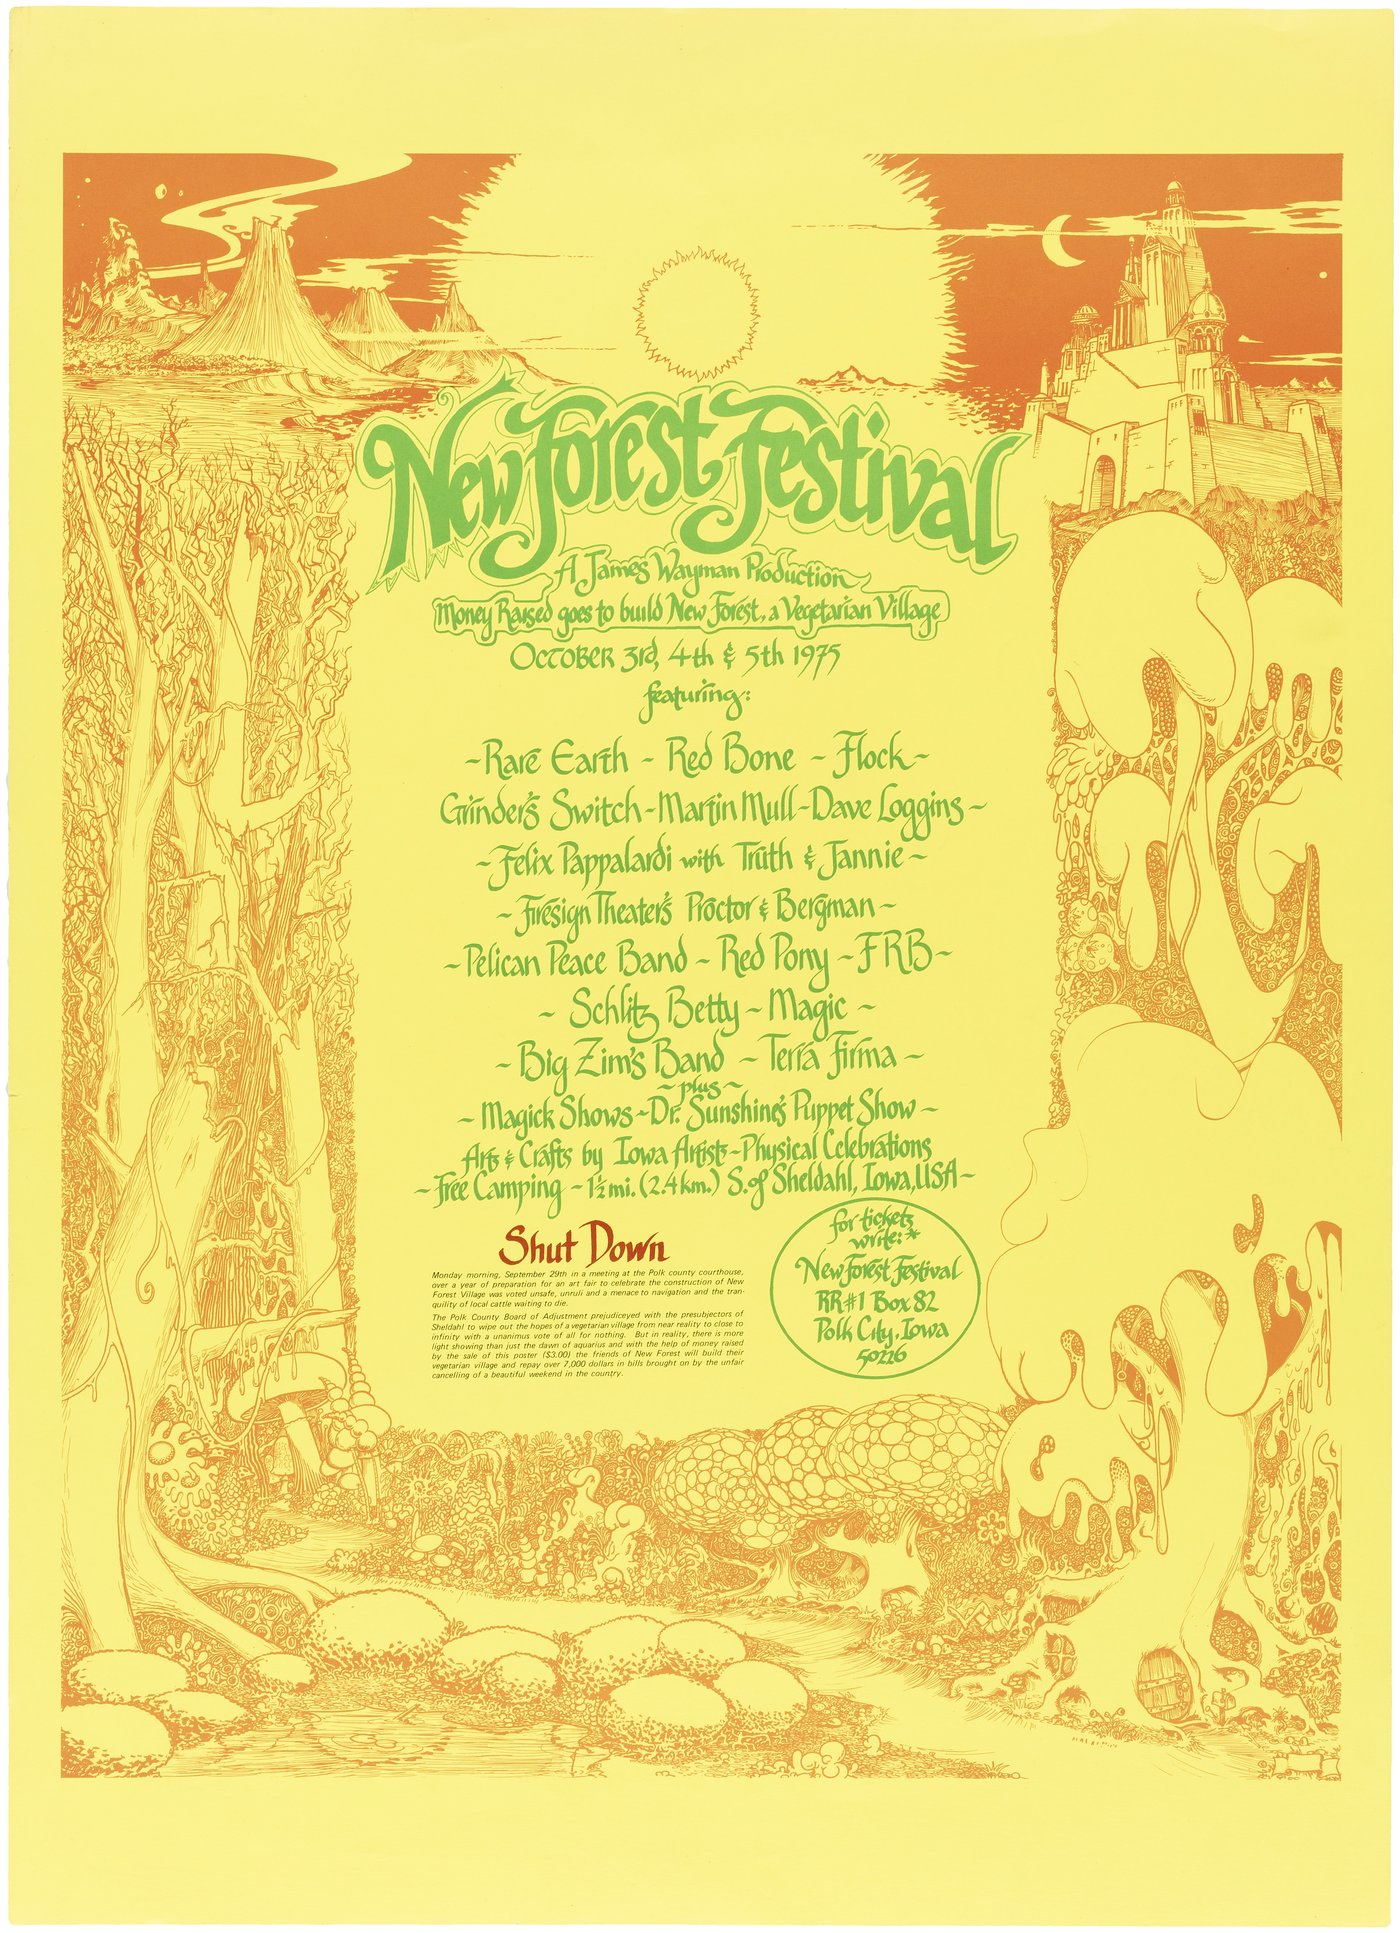 Hake's NEW FOREST FESTIVAL CONCERT POSTER FEATURING REDBONE.